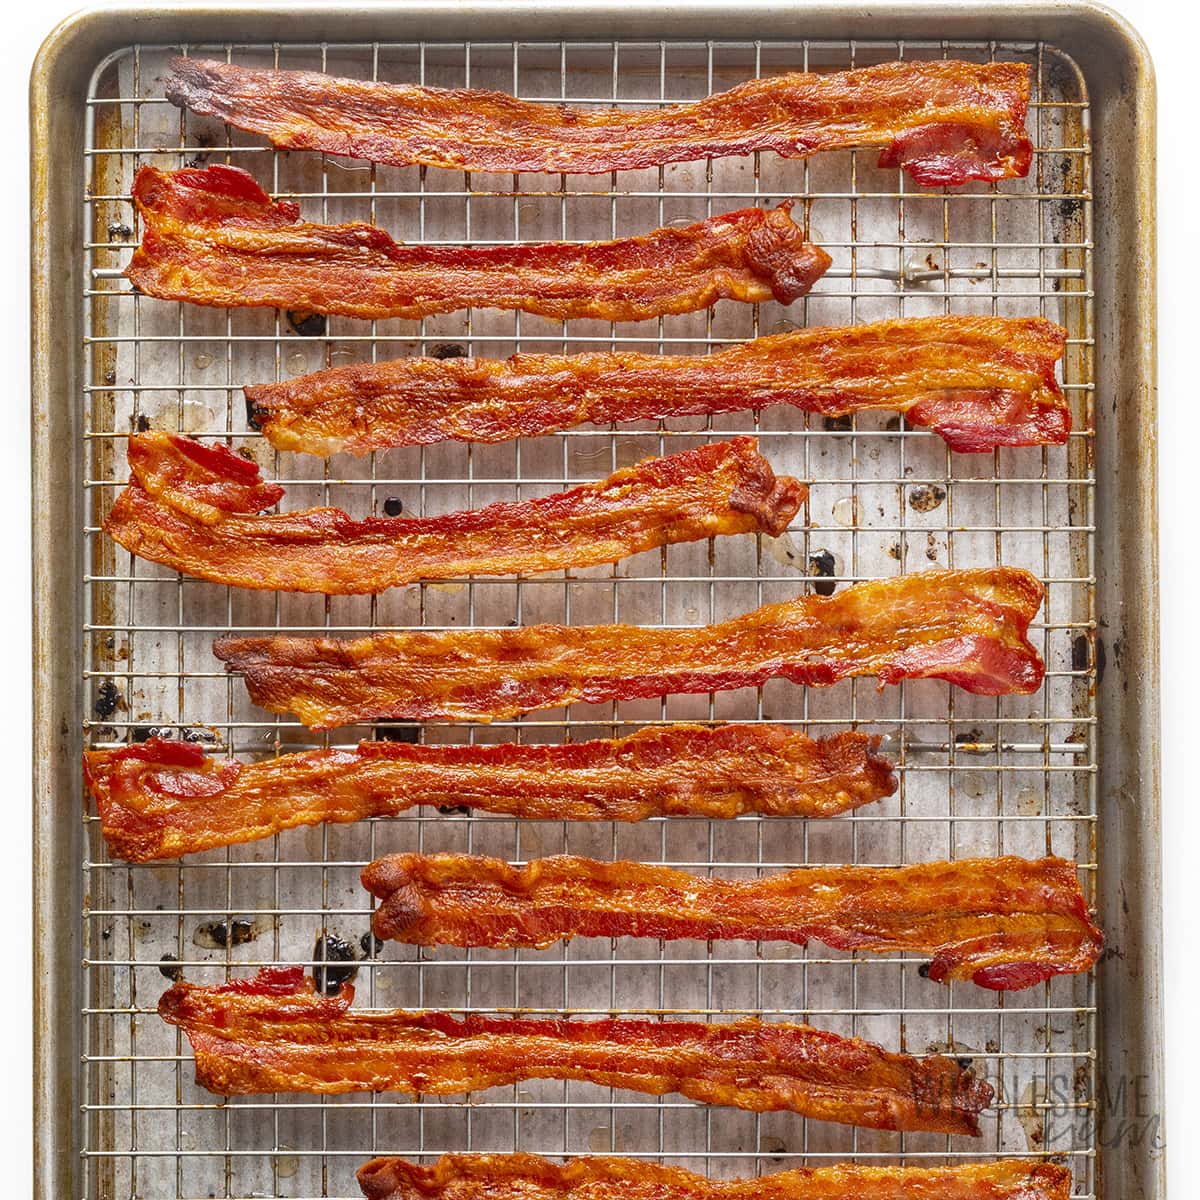 Bacon on a rack after baking bacon in the oven.